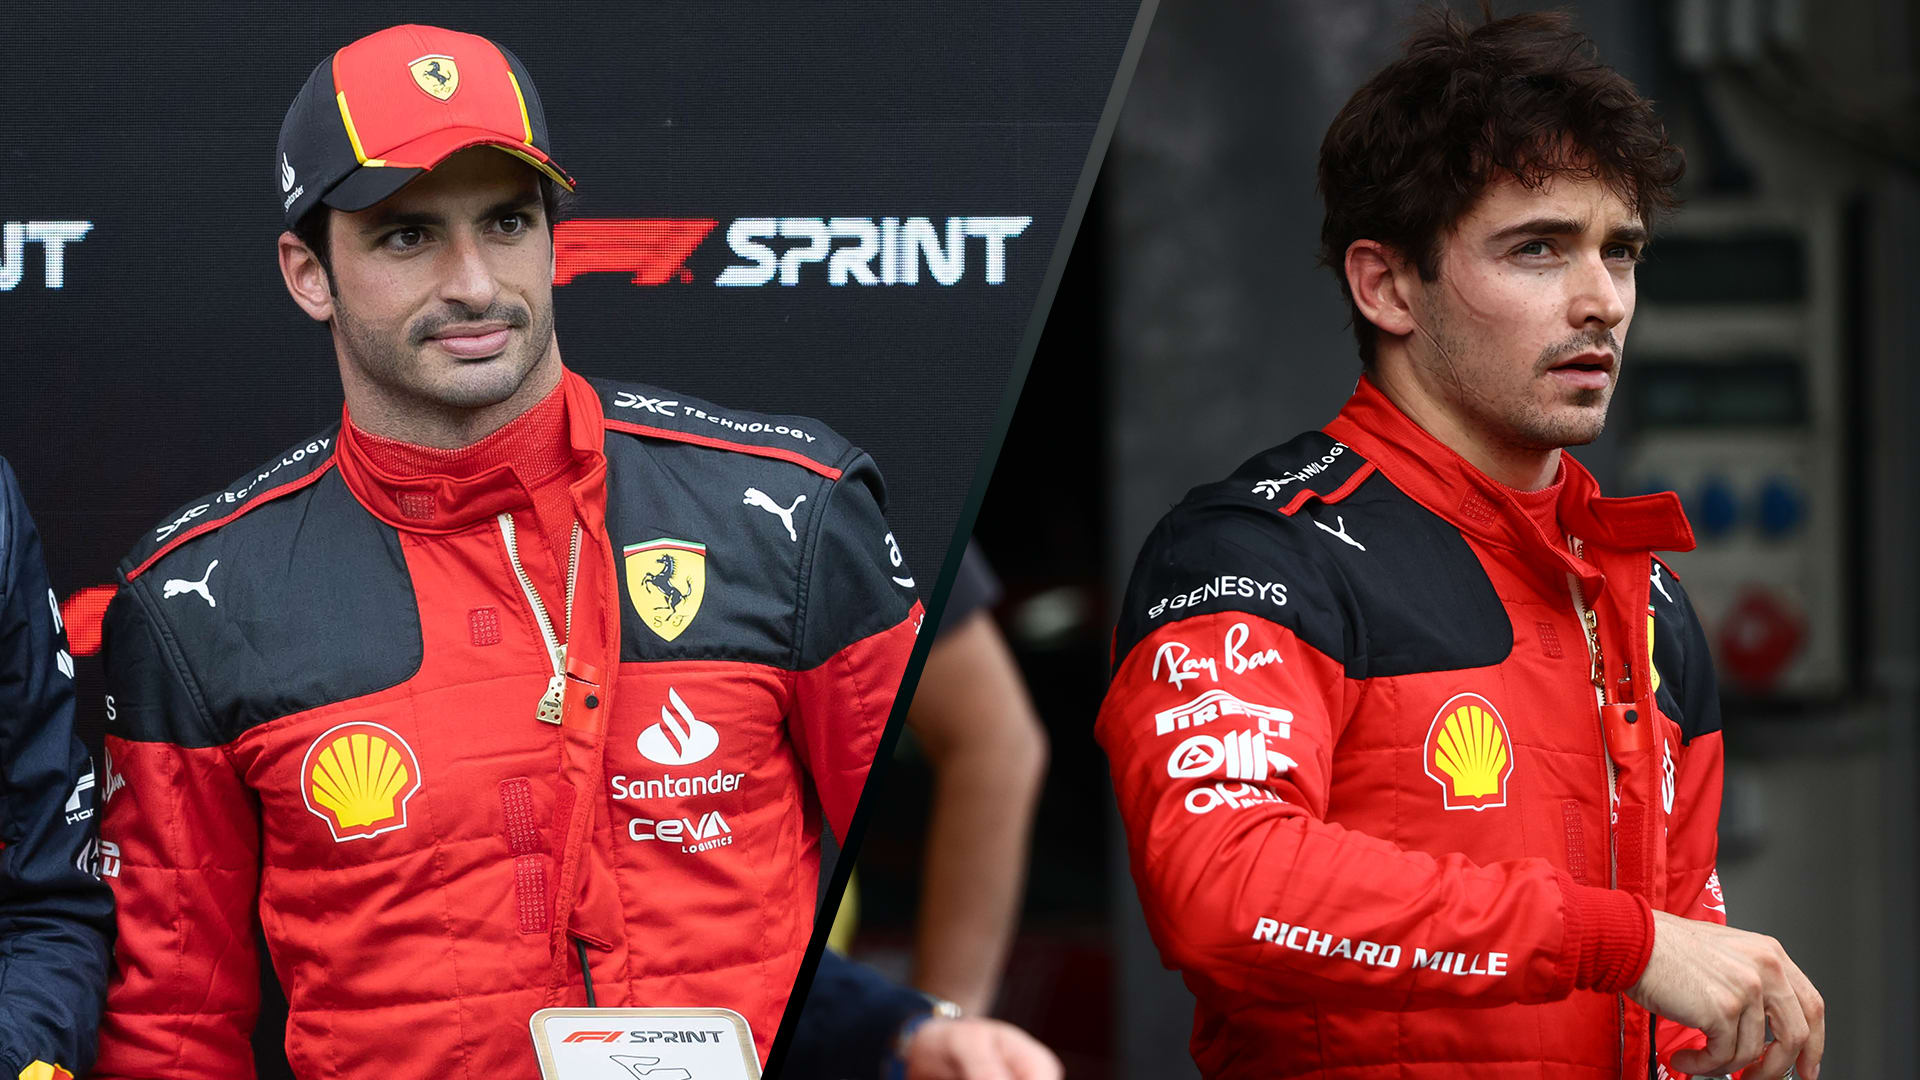 Contrasting emotions at Ferrari after Austria Sprint as Sainz achieves  'maximum' in P3 and Leclerc bemoans being 'nowhere' | Formula 1®